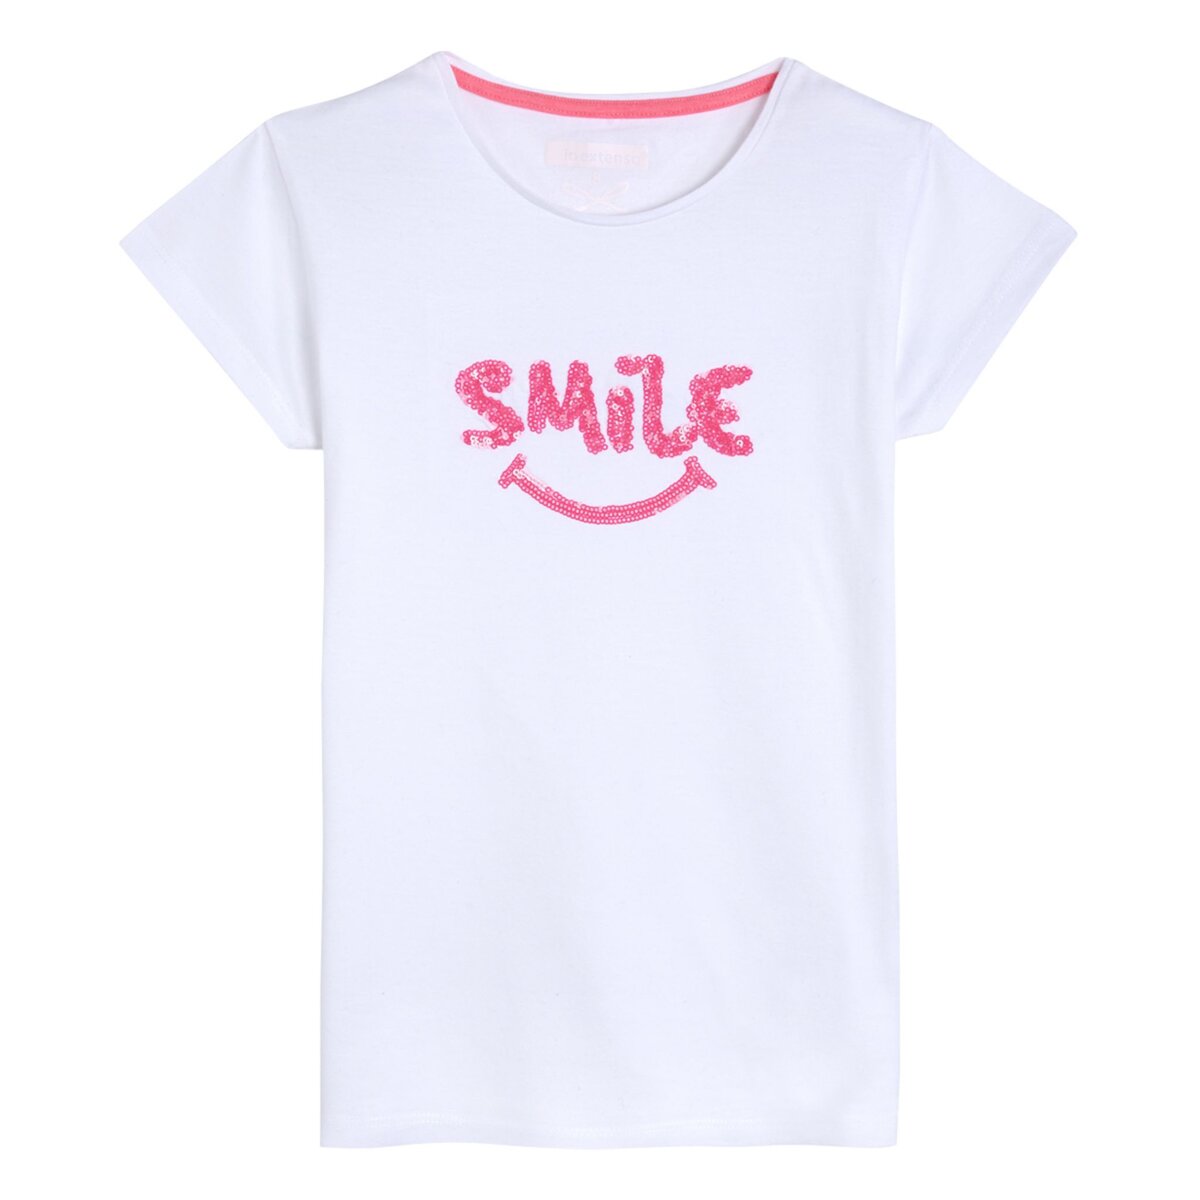 IN EXTENSO Tee-shirt manches courtes "Smile" fille